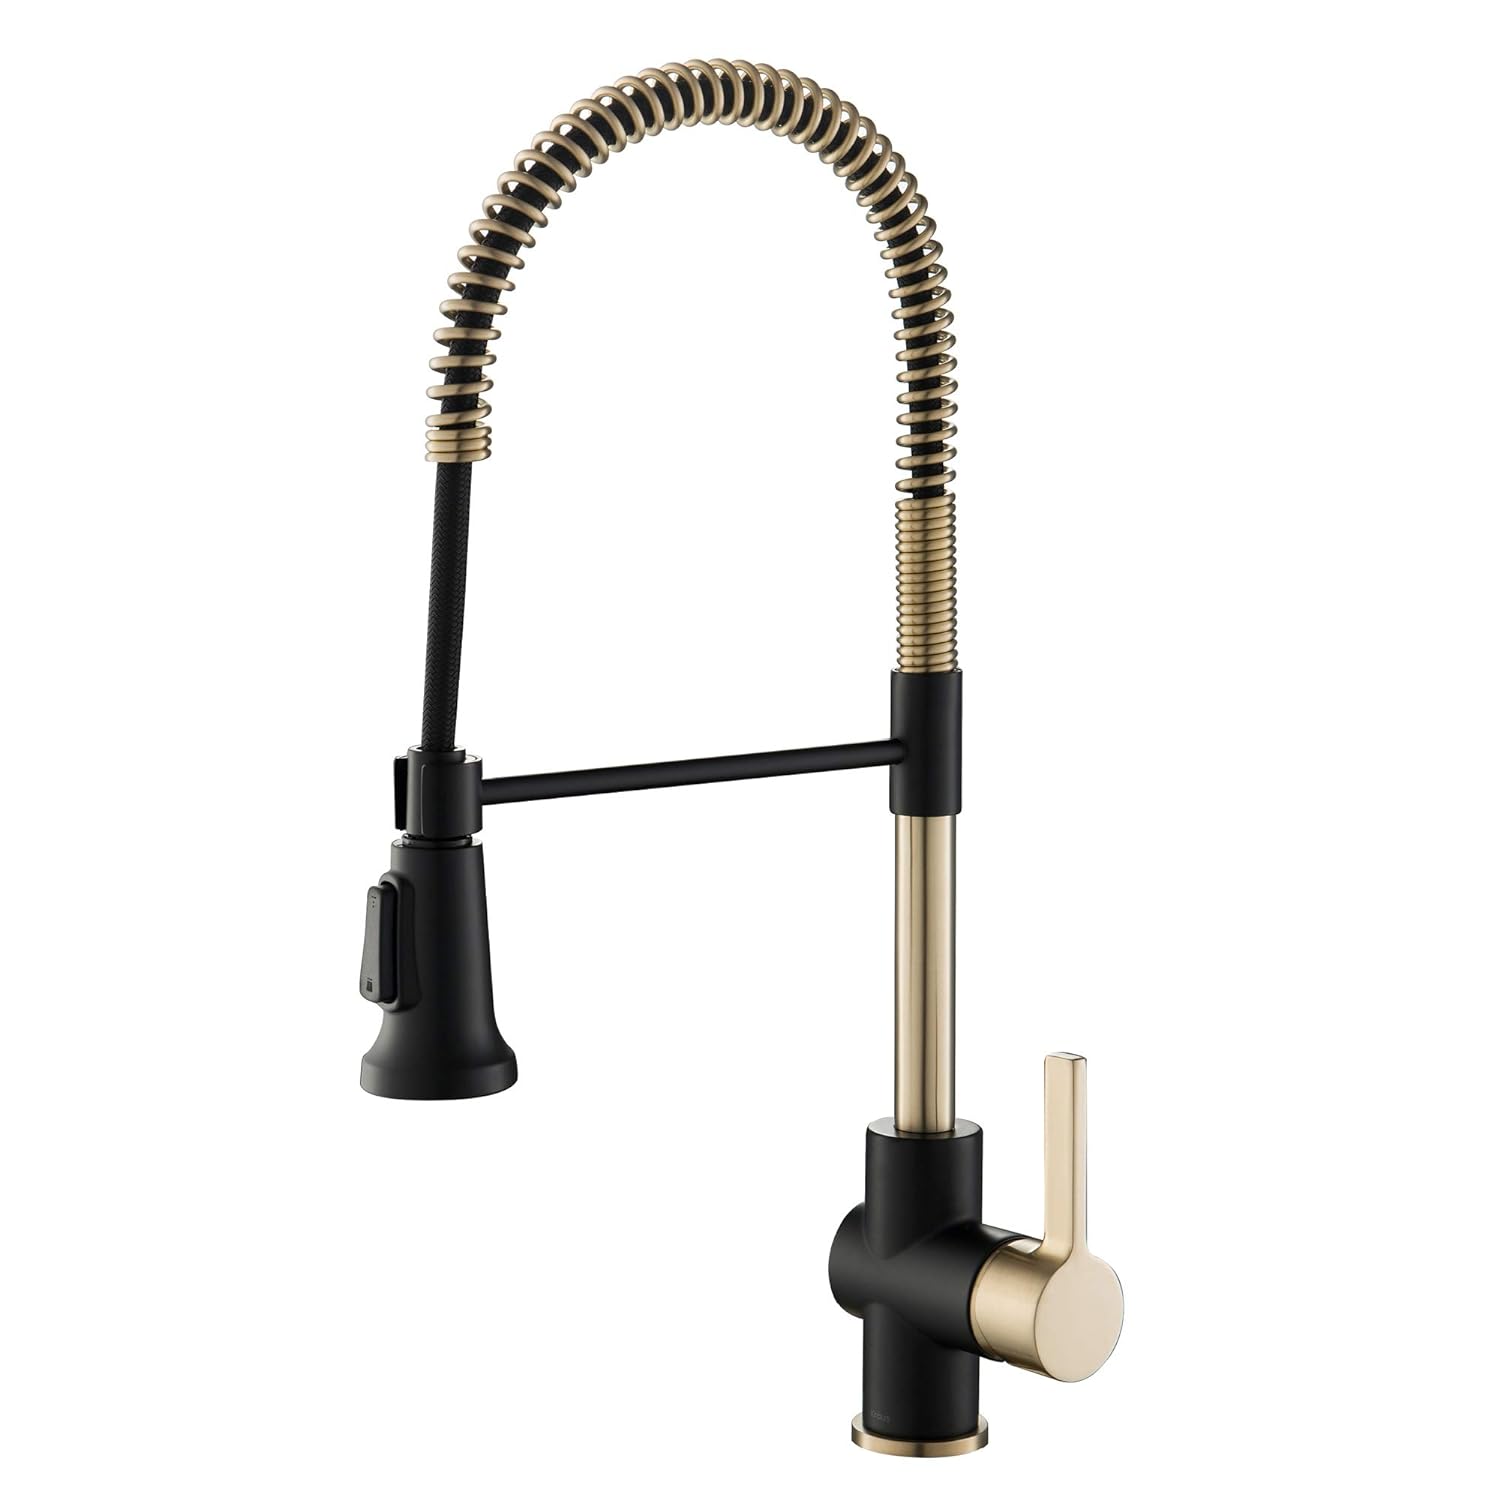 Kraus KPF-1690BGMB Britt Pre-Rinse/Commercial Kitchen Faucet with Dual Function Sprayhead in All-Brite Finish, Brushed Gold/Matte Black